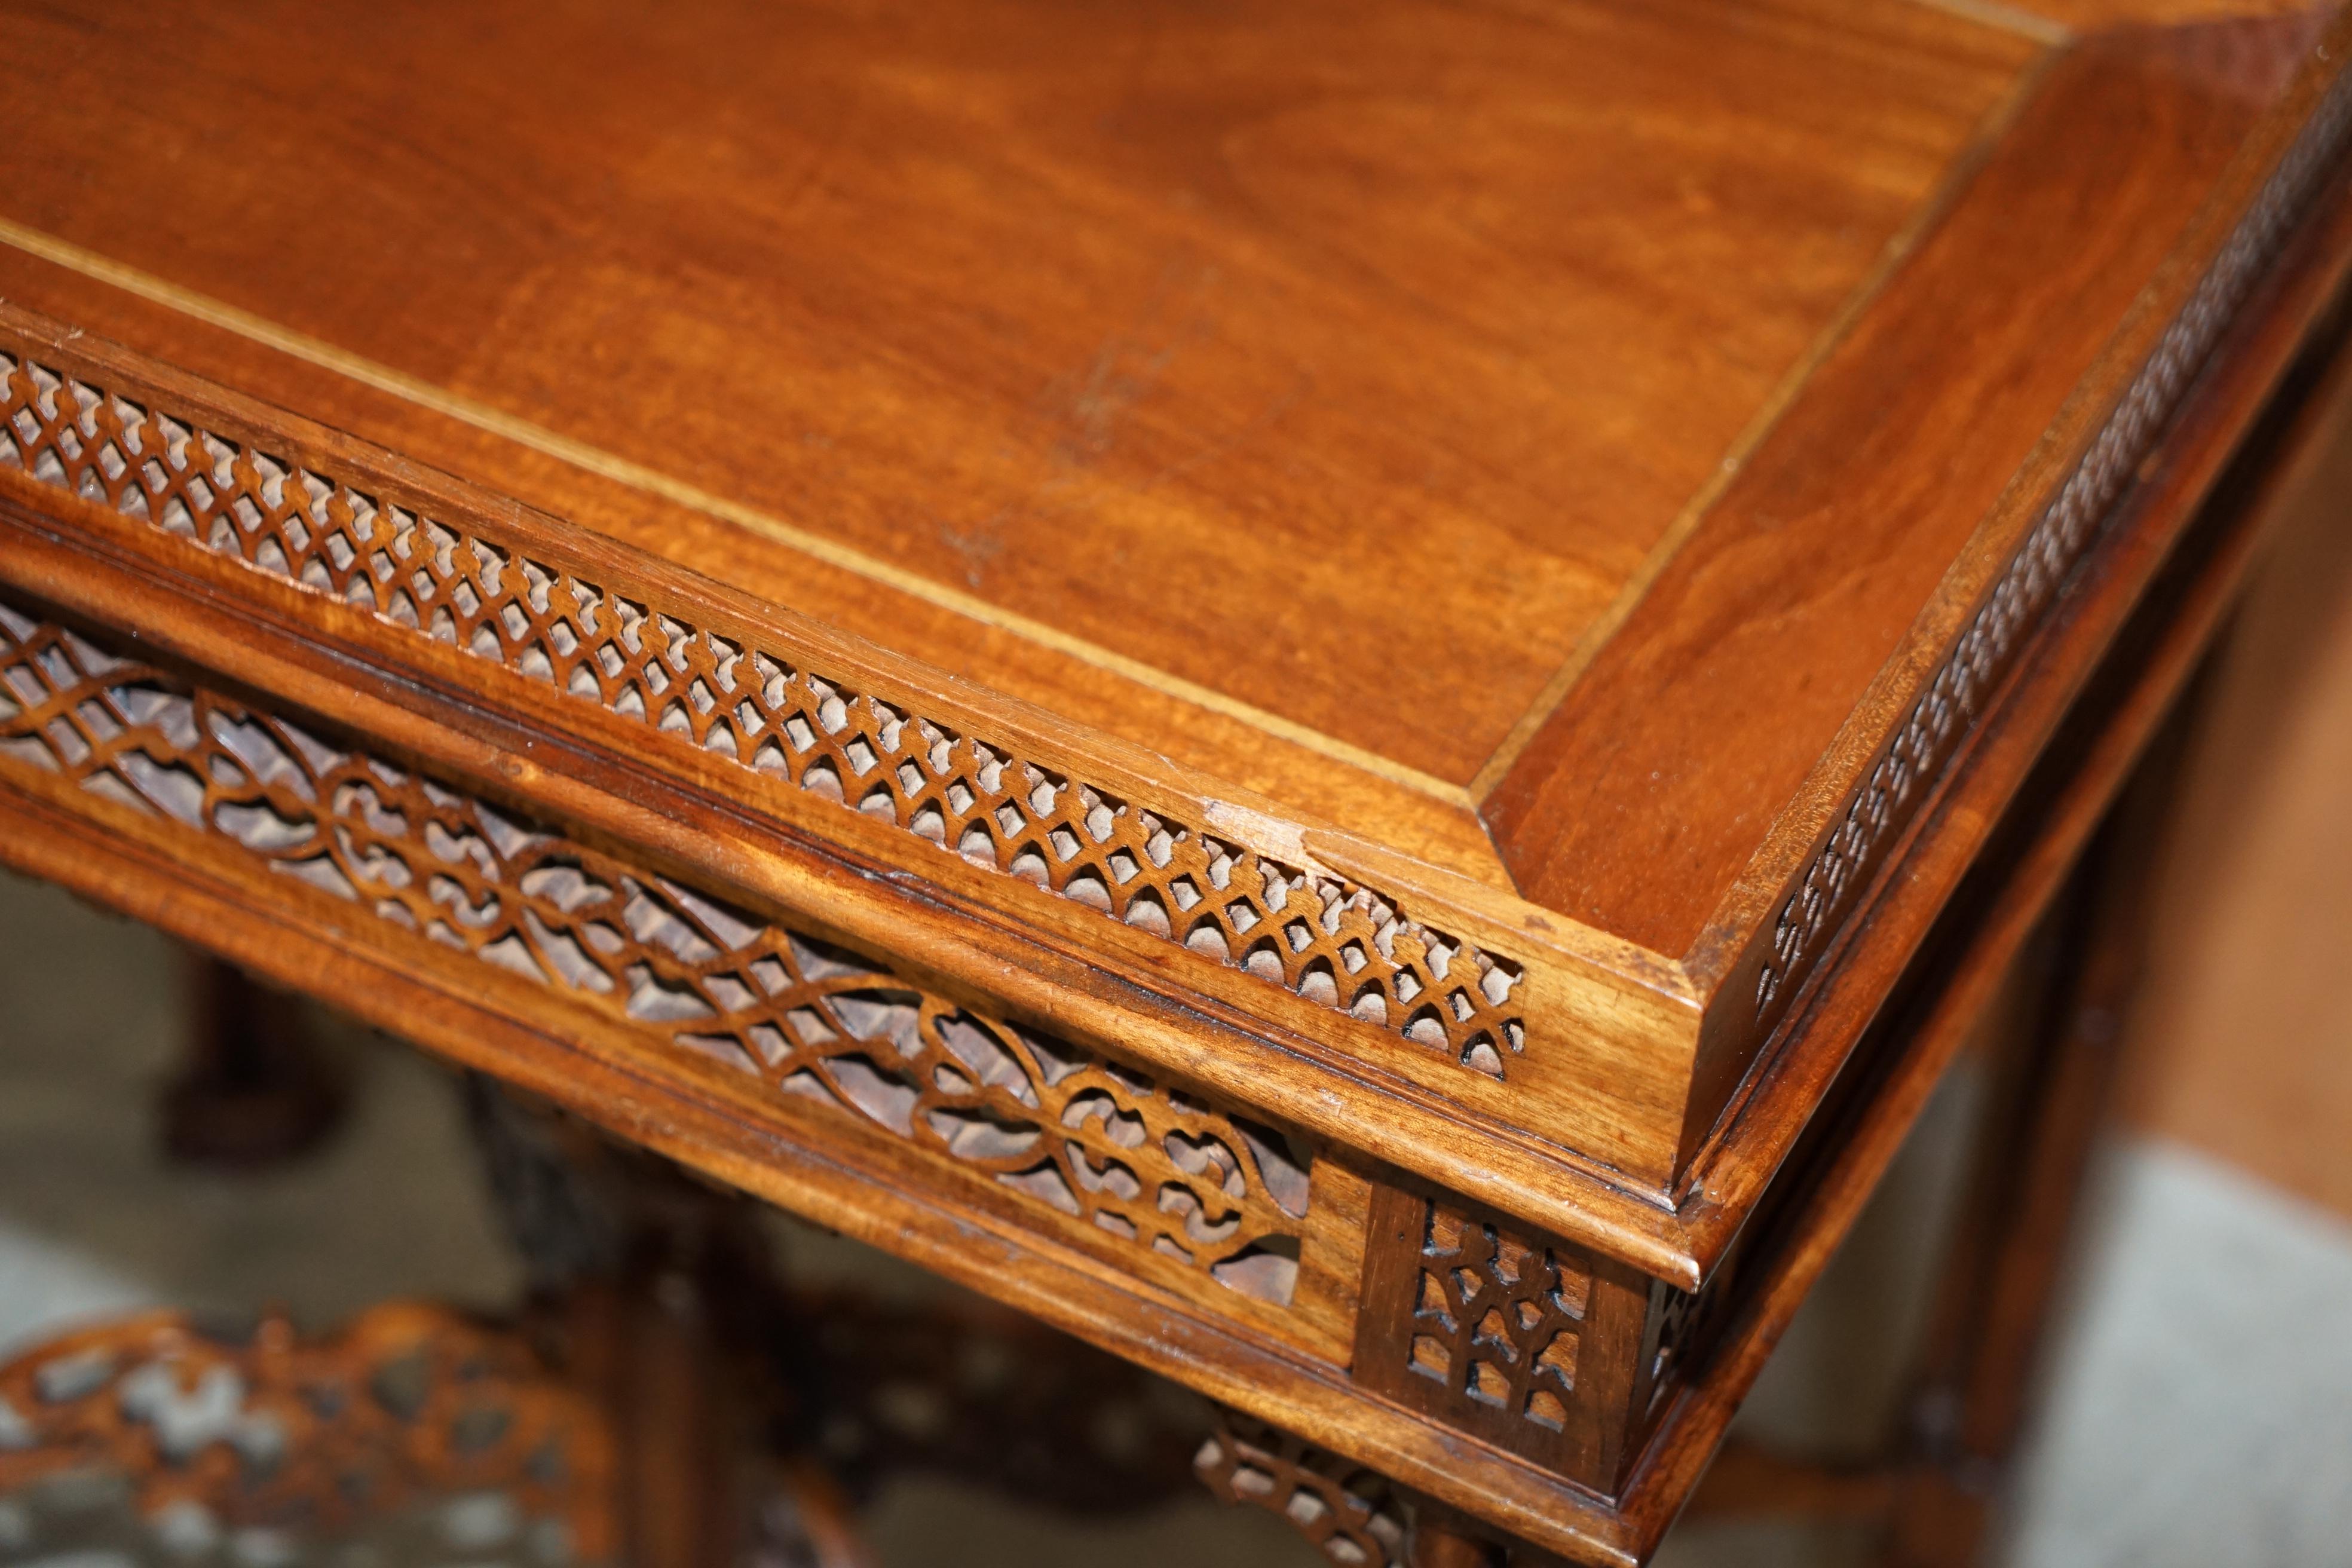 19th Century Thomas Chippendale Fret Work Carved Silver Tea Occasional Table For Sale 3